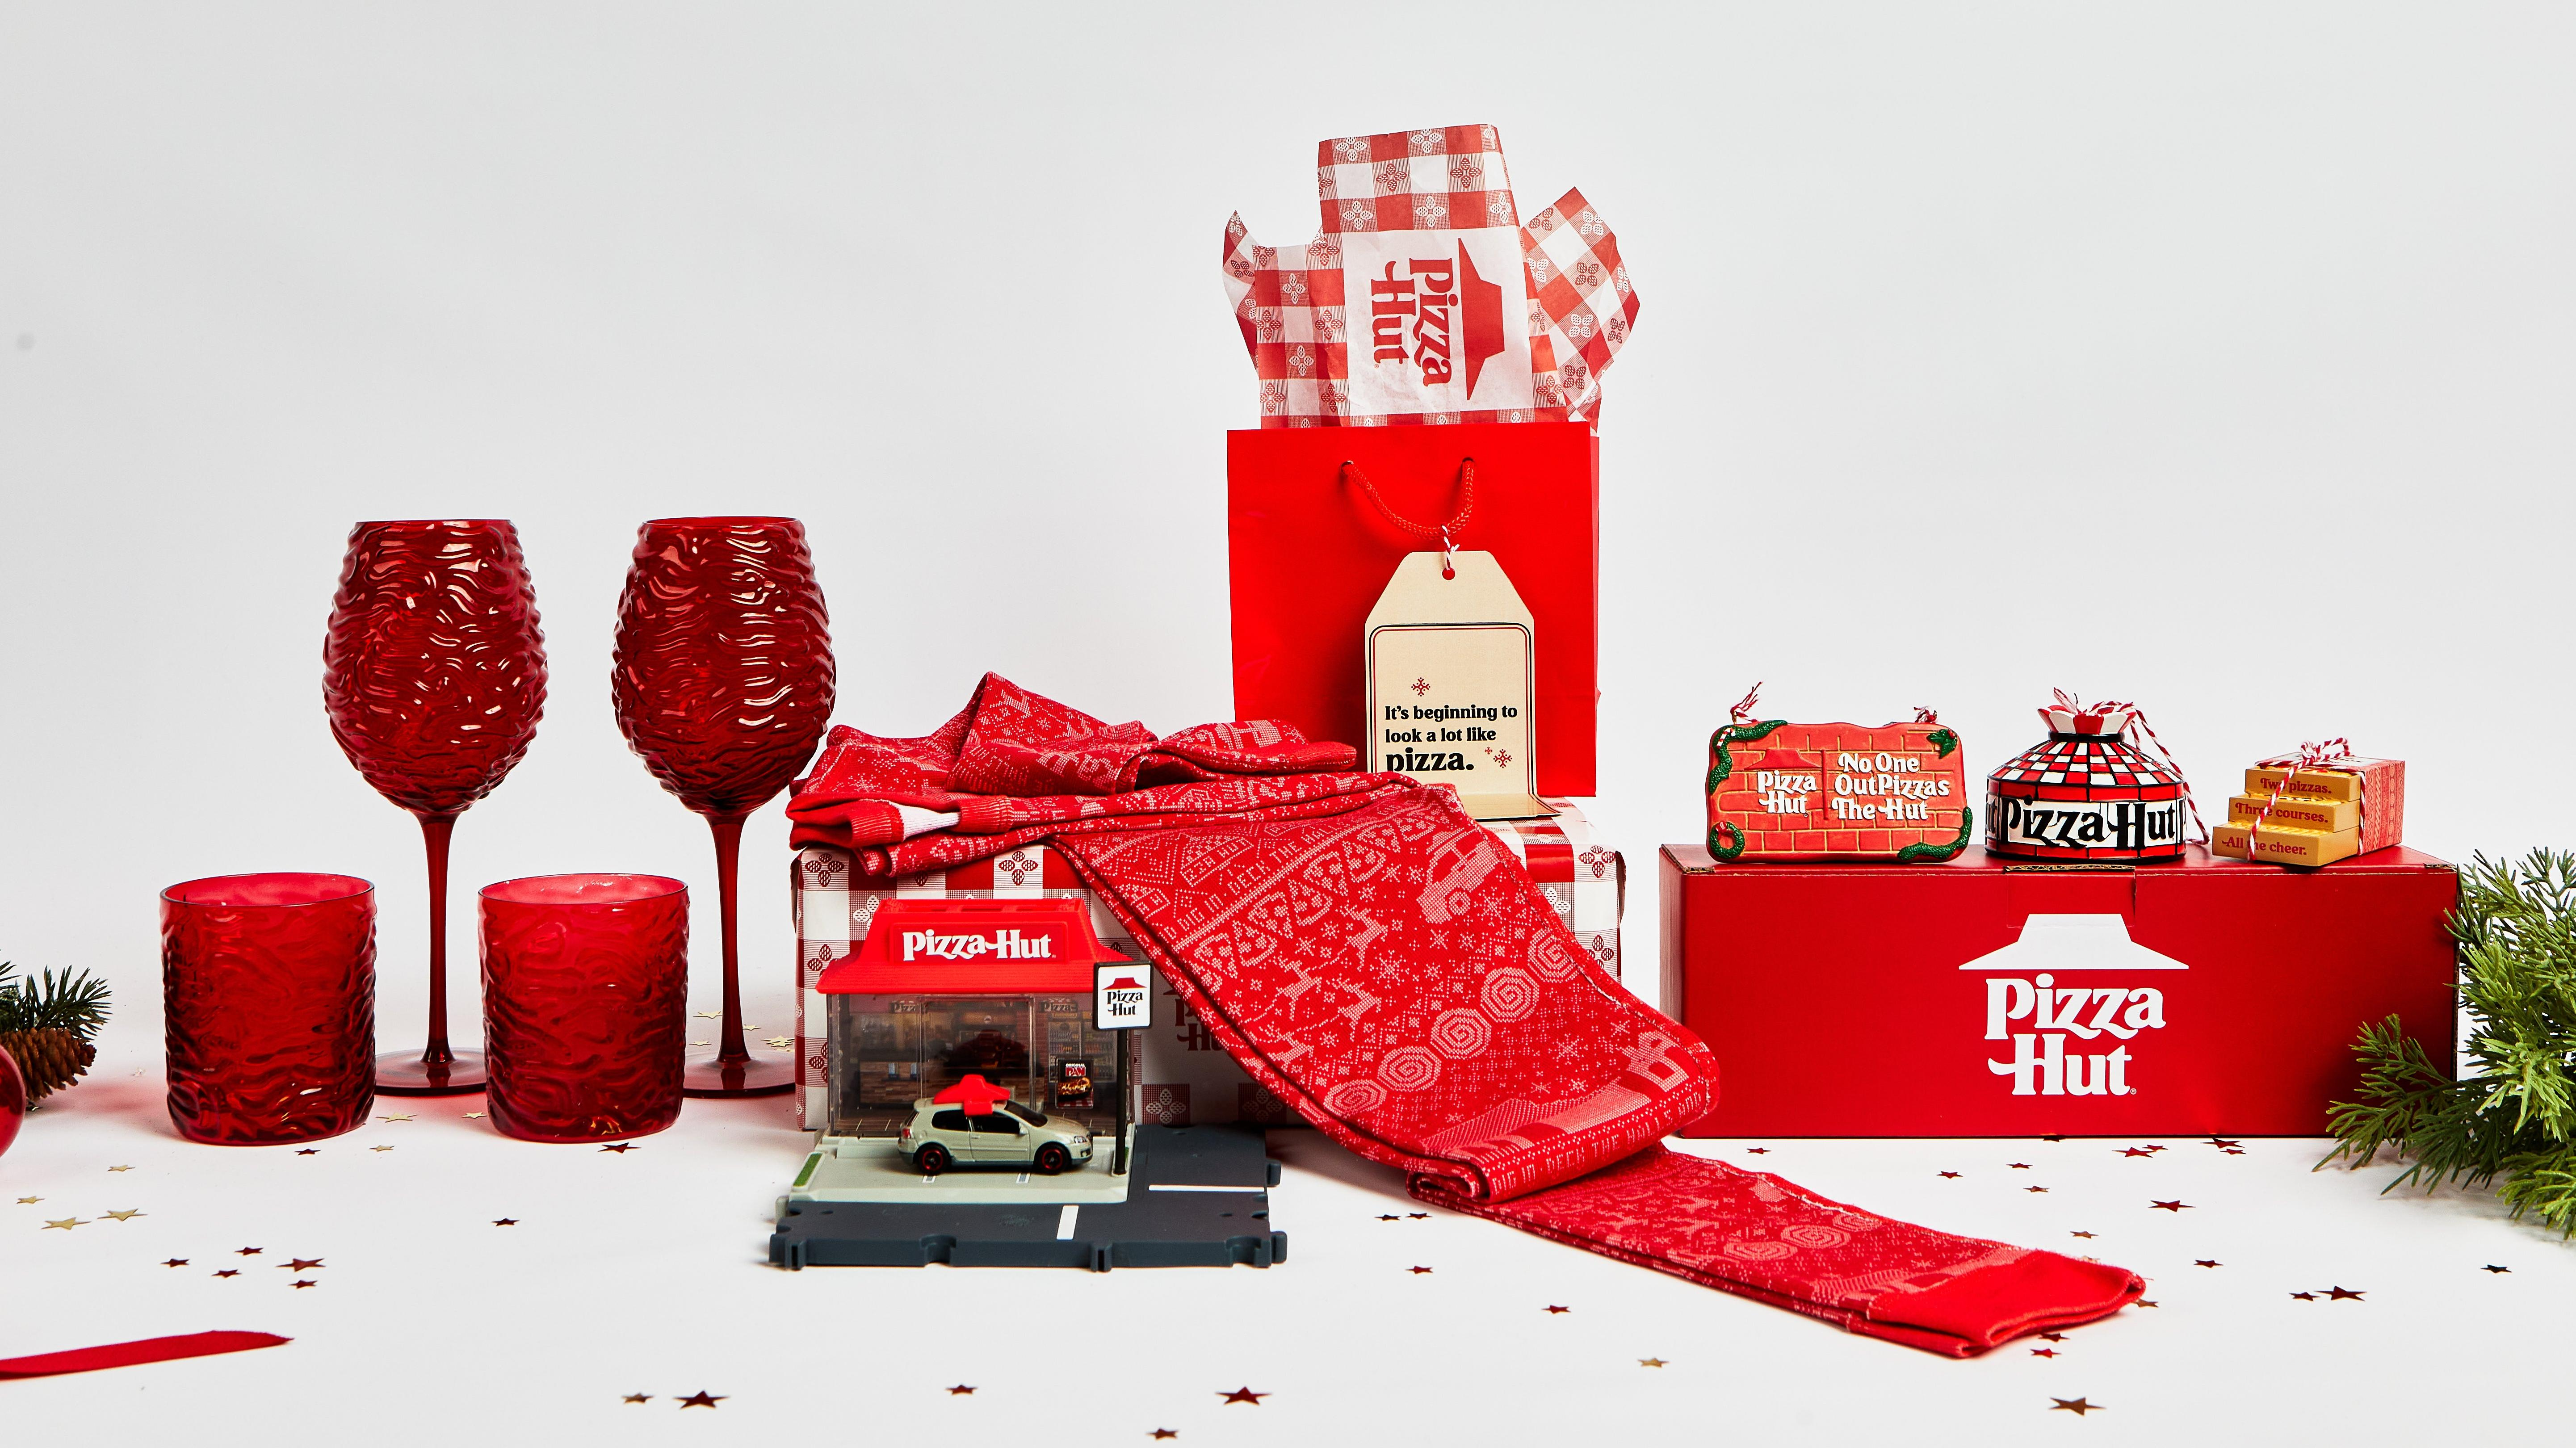 Pizza Hut 2021 holiday swag with wine glasses, rocks glasses, Matchbox set, ornaments, and pajamas